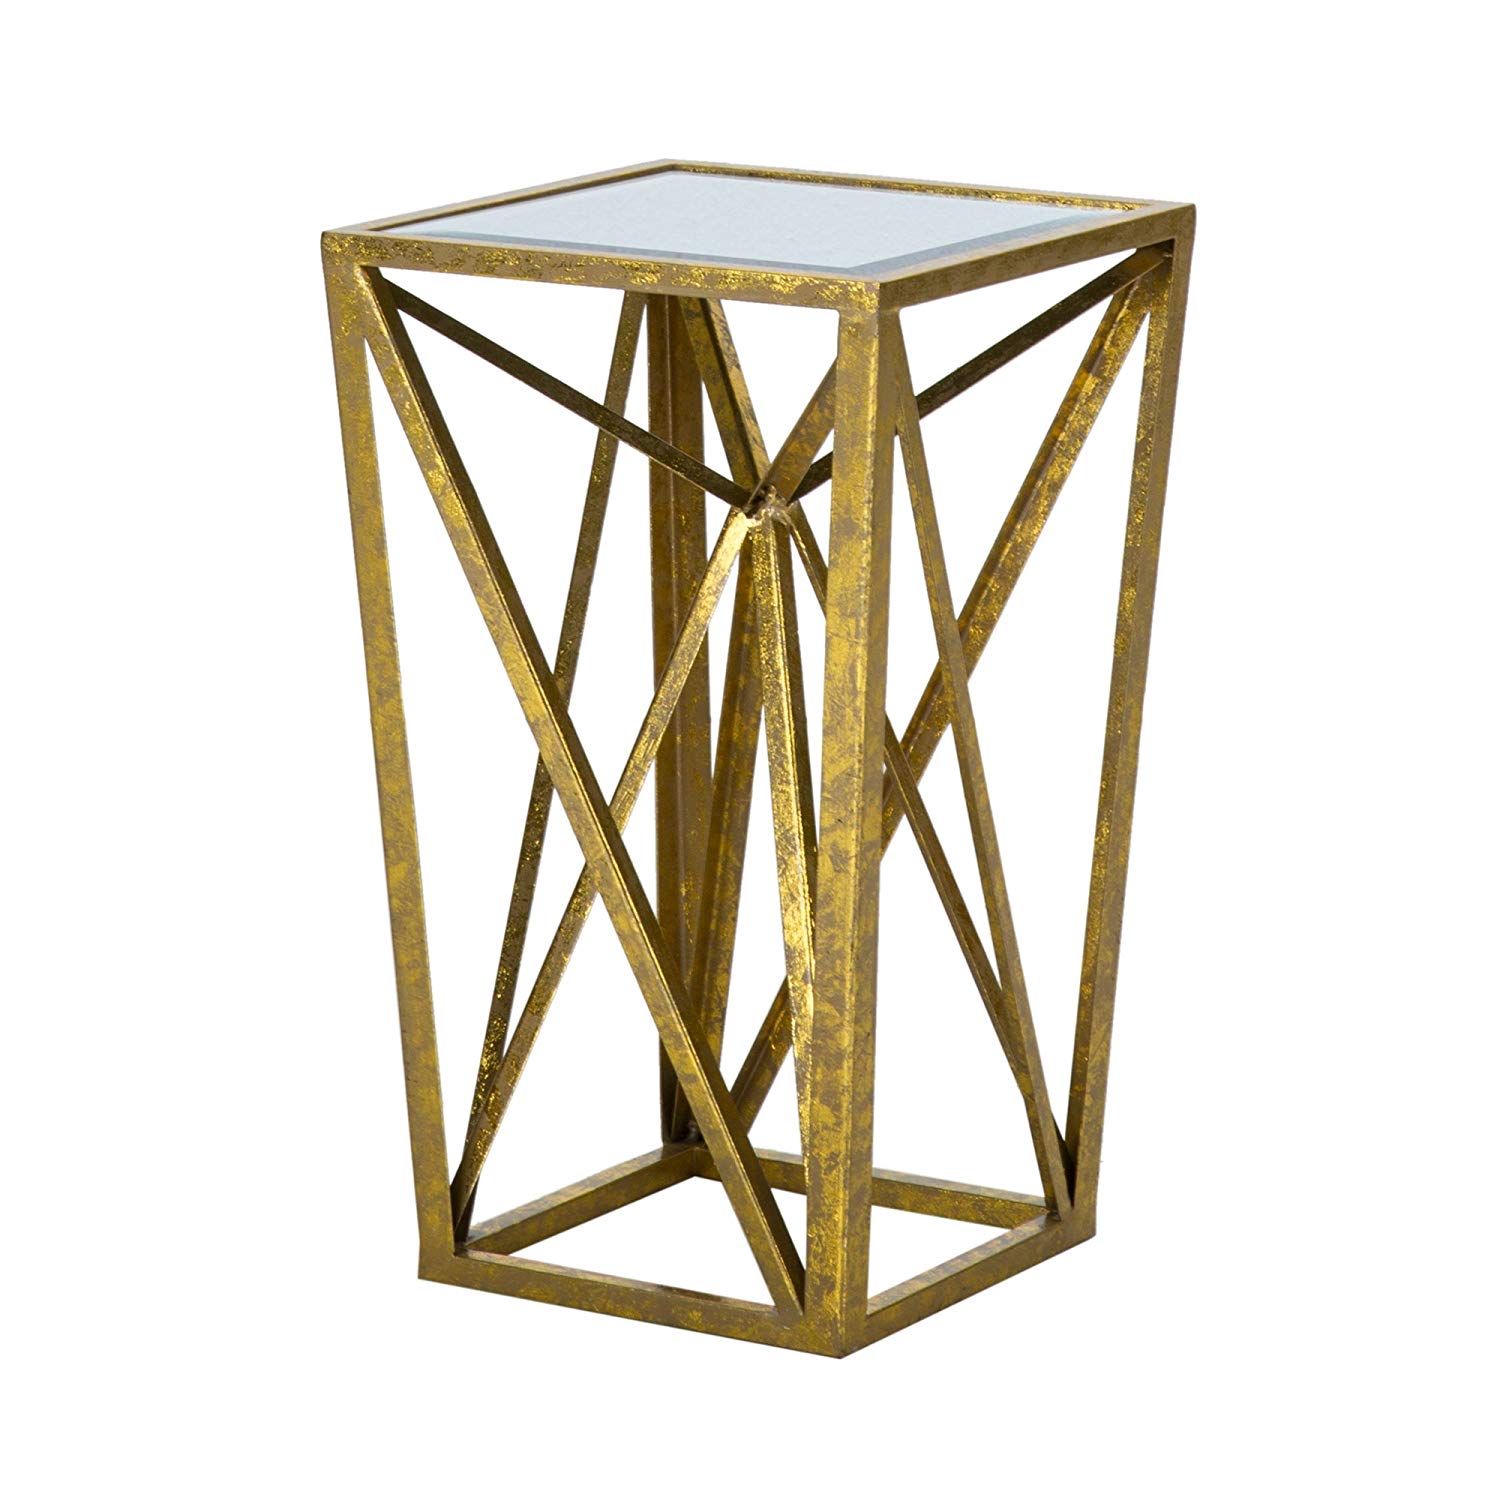 waterbury silver accent table tables colors aharney madison park angular mirror gold kitchen knurl nesting sofa patio and chairs with umbrella brown nightstand storage drum two